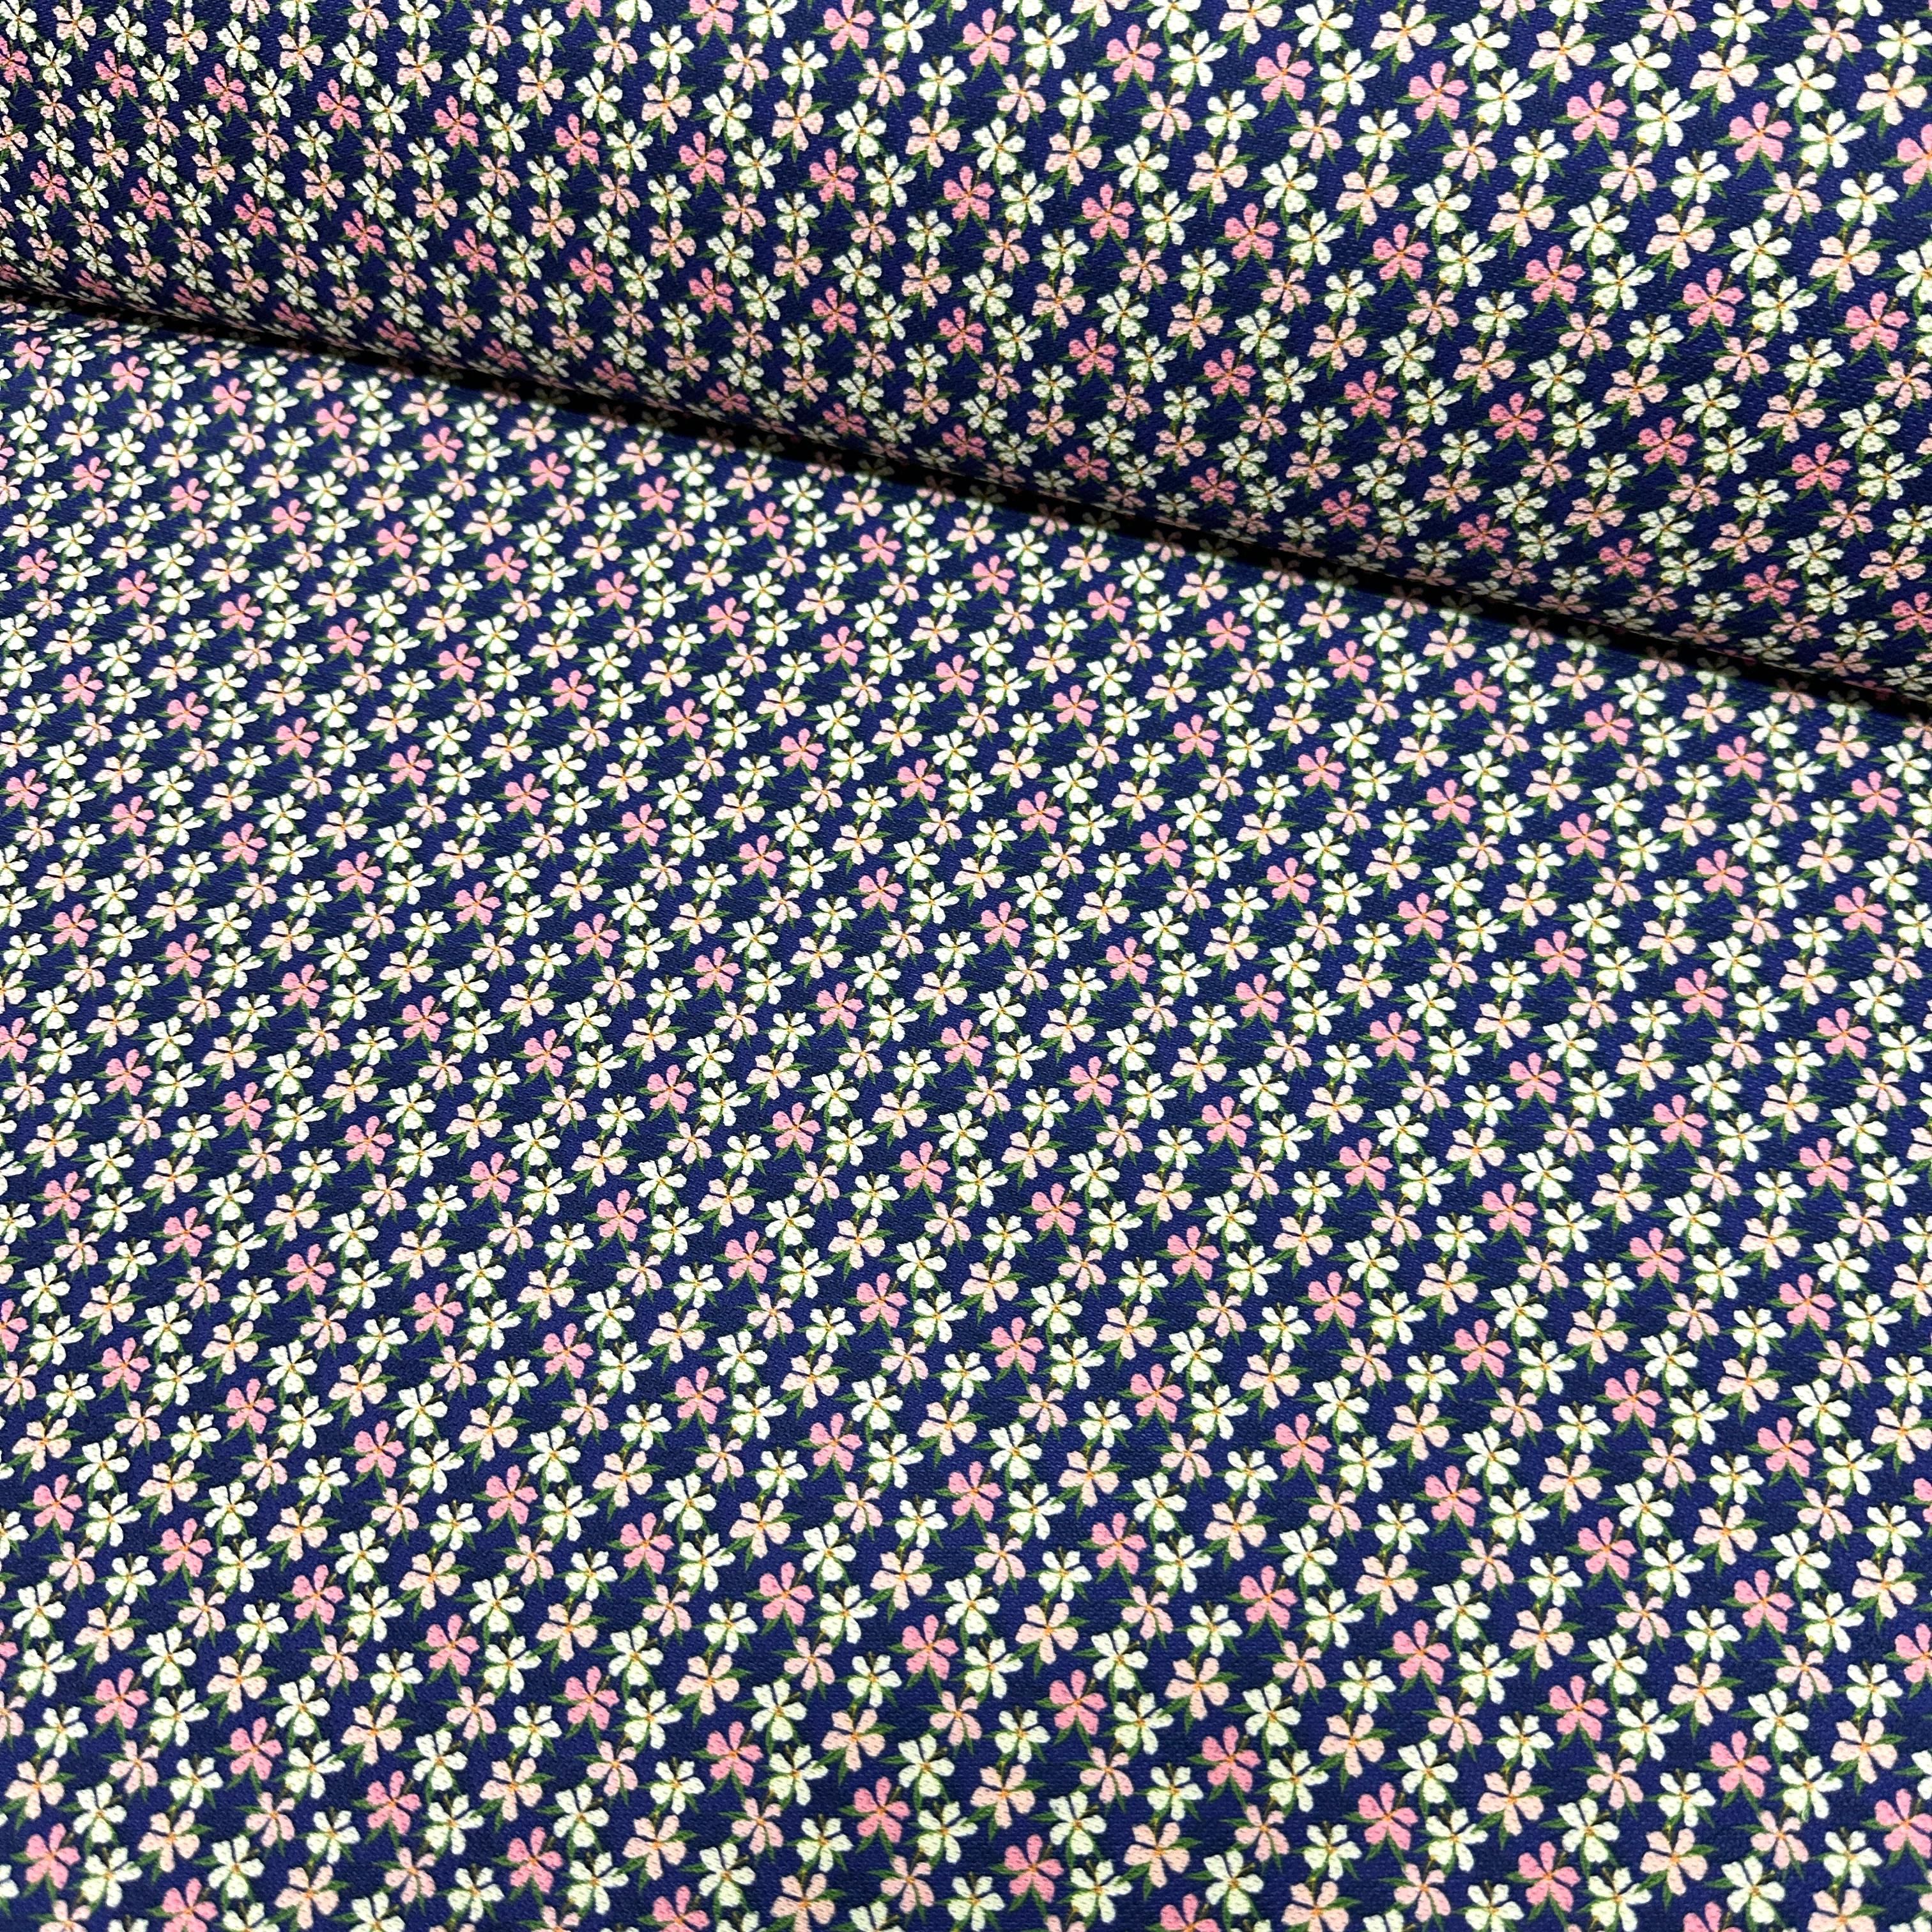 White and Pink Flowers Digital Printing Fabric